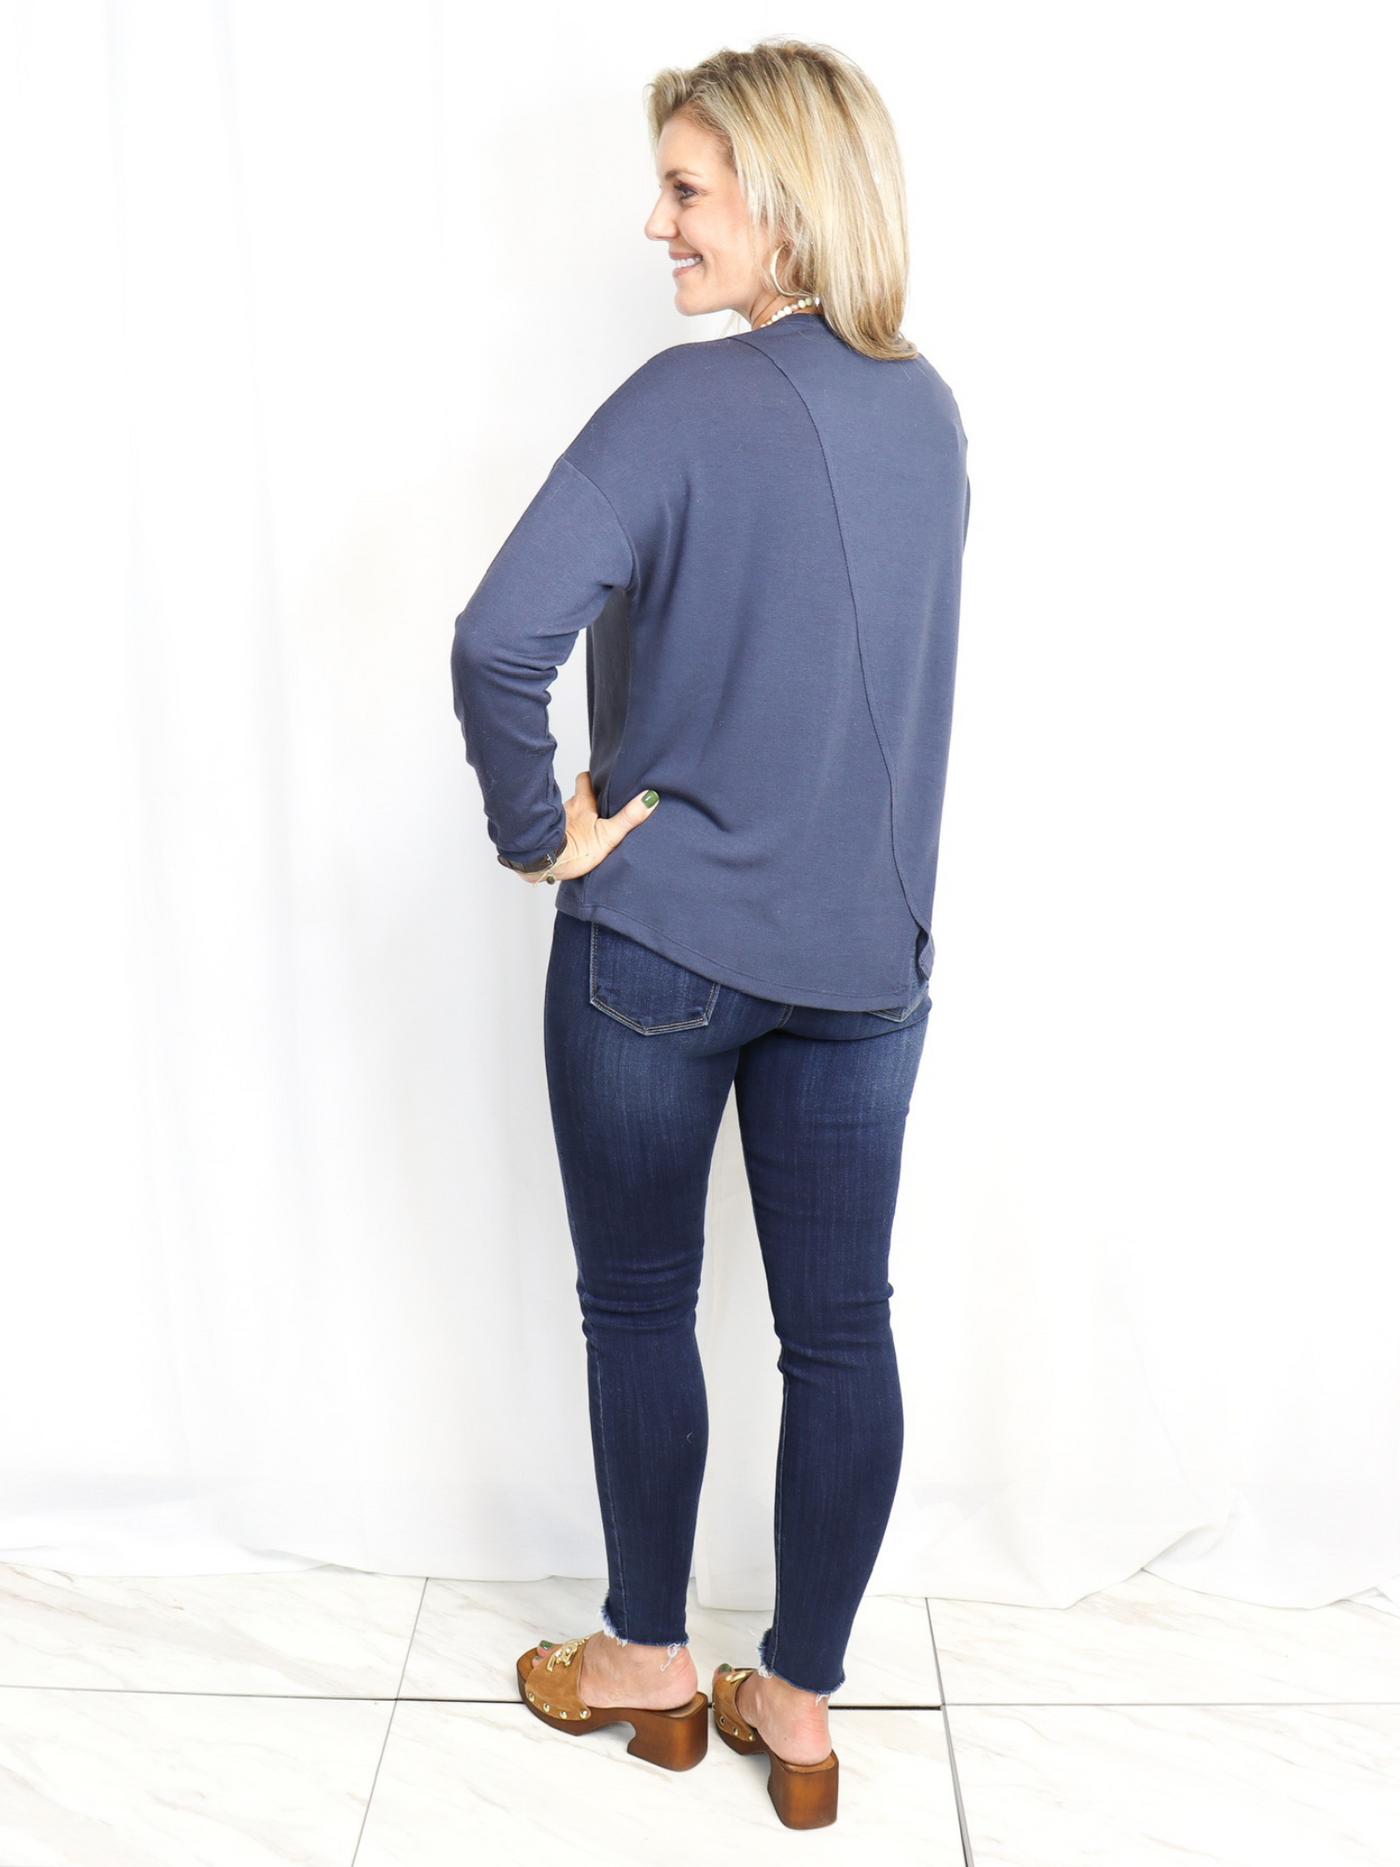 Asymmetrical Knit Top with jeans back view.